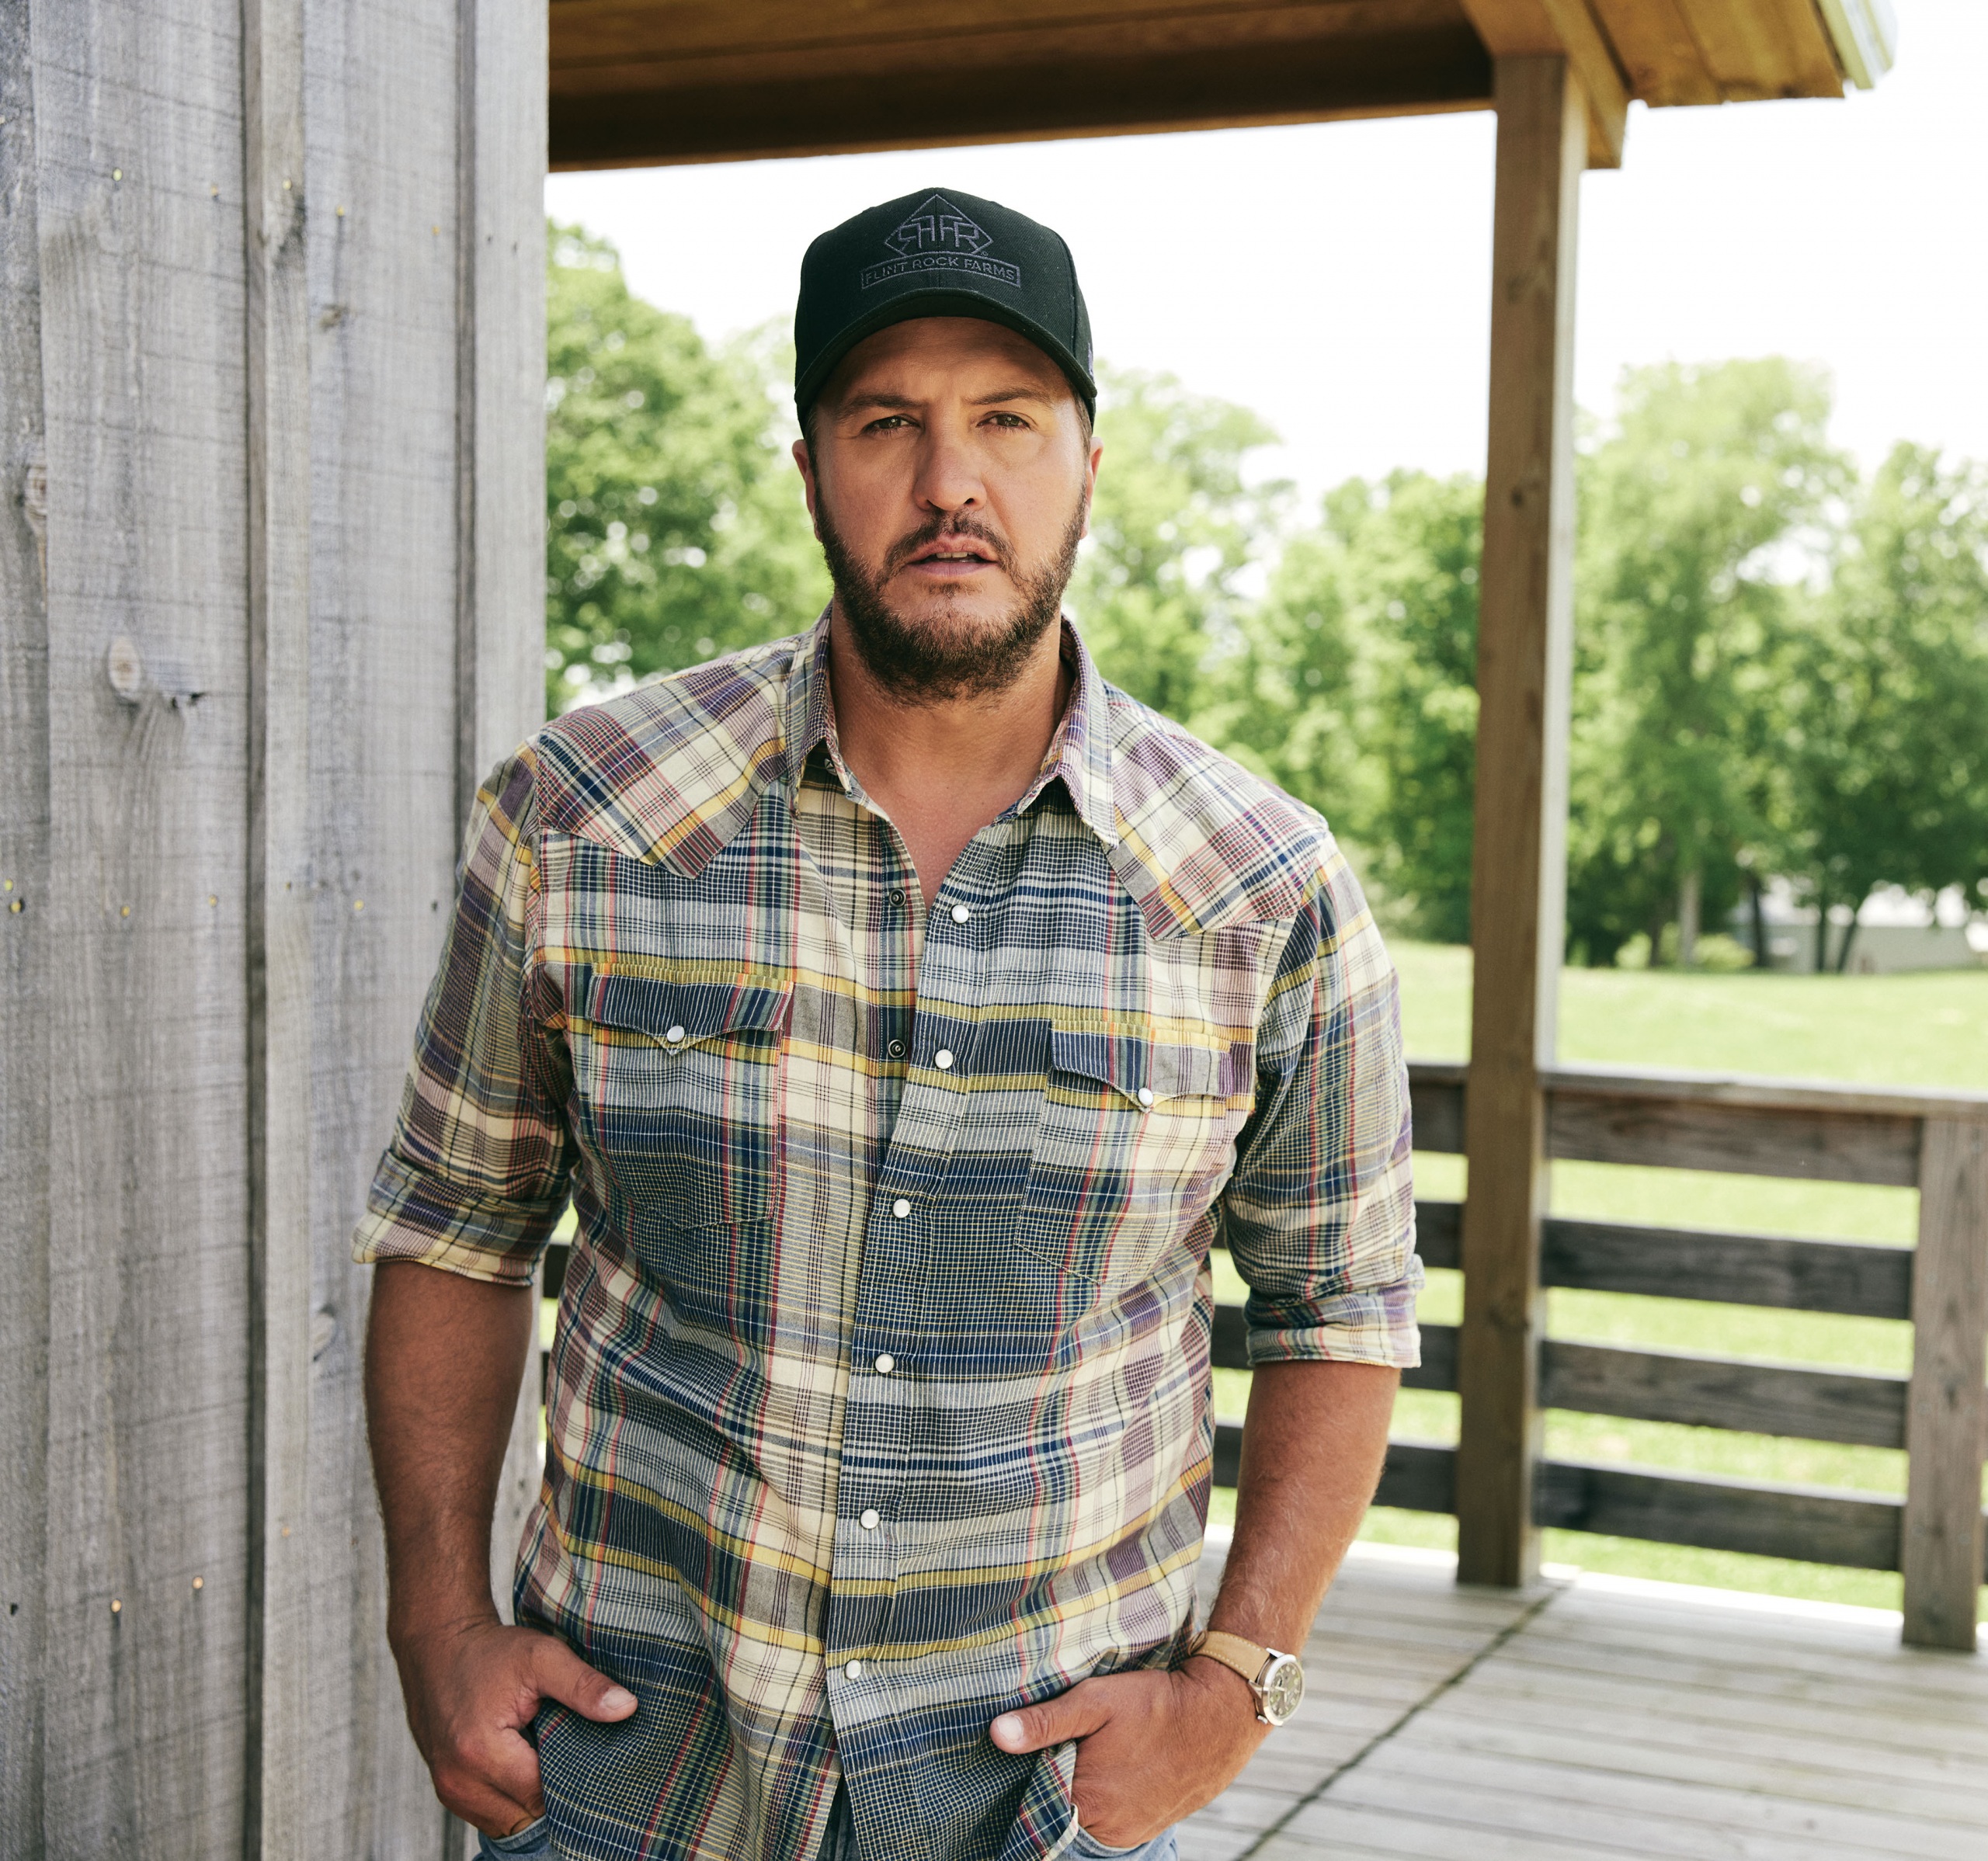 LUKE BRYAN PREMIERES BRAND NEW SINGLE, “COUNTRY ON,” AT COUNTRY RADIO.